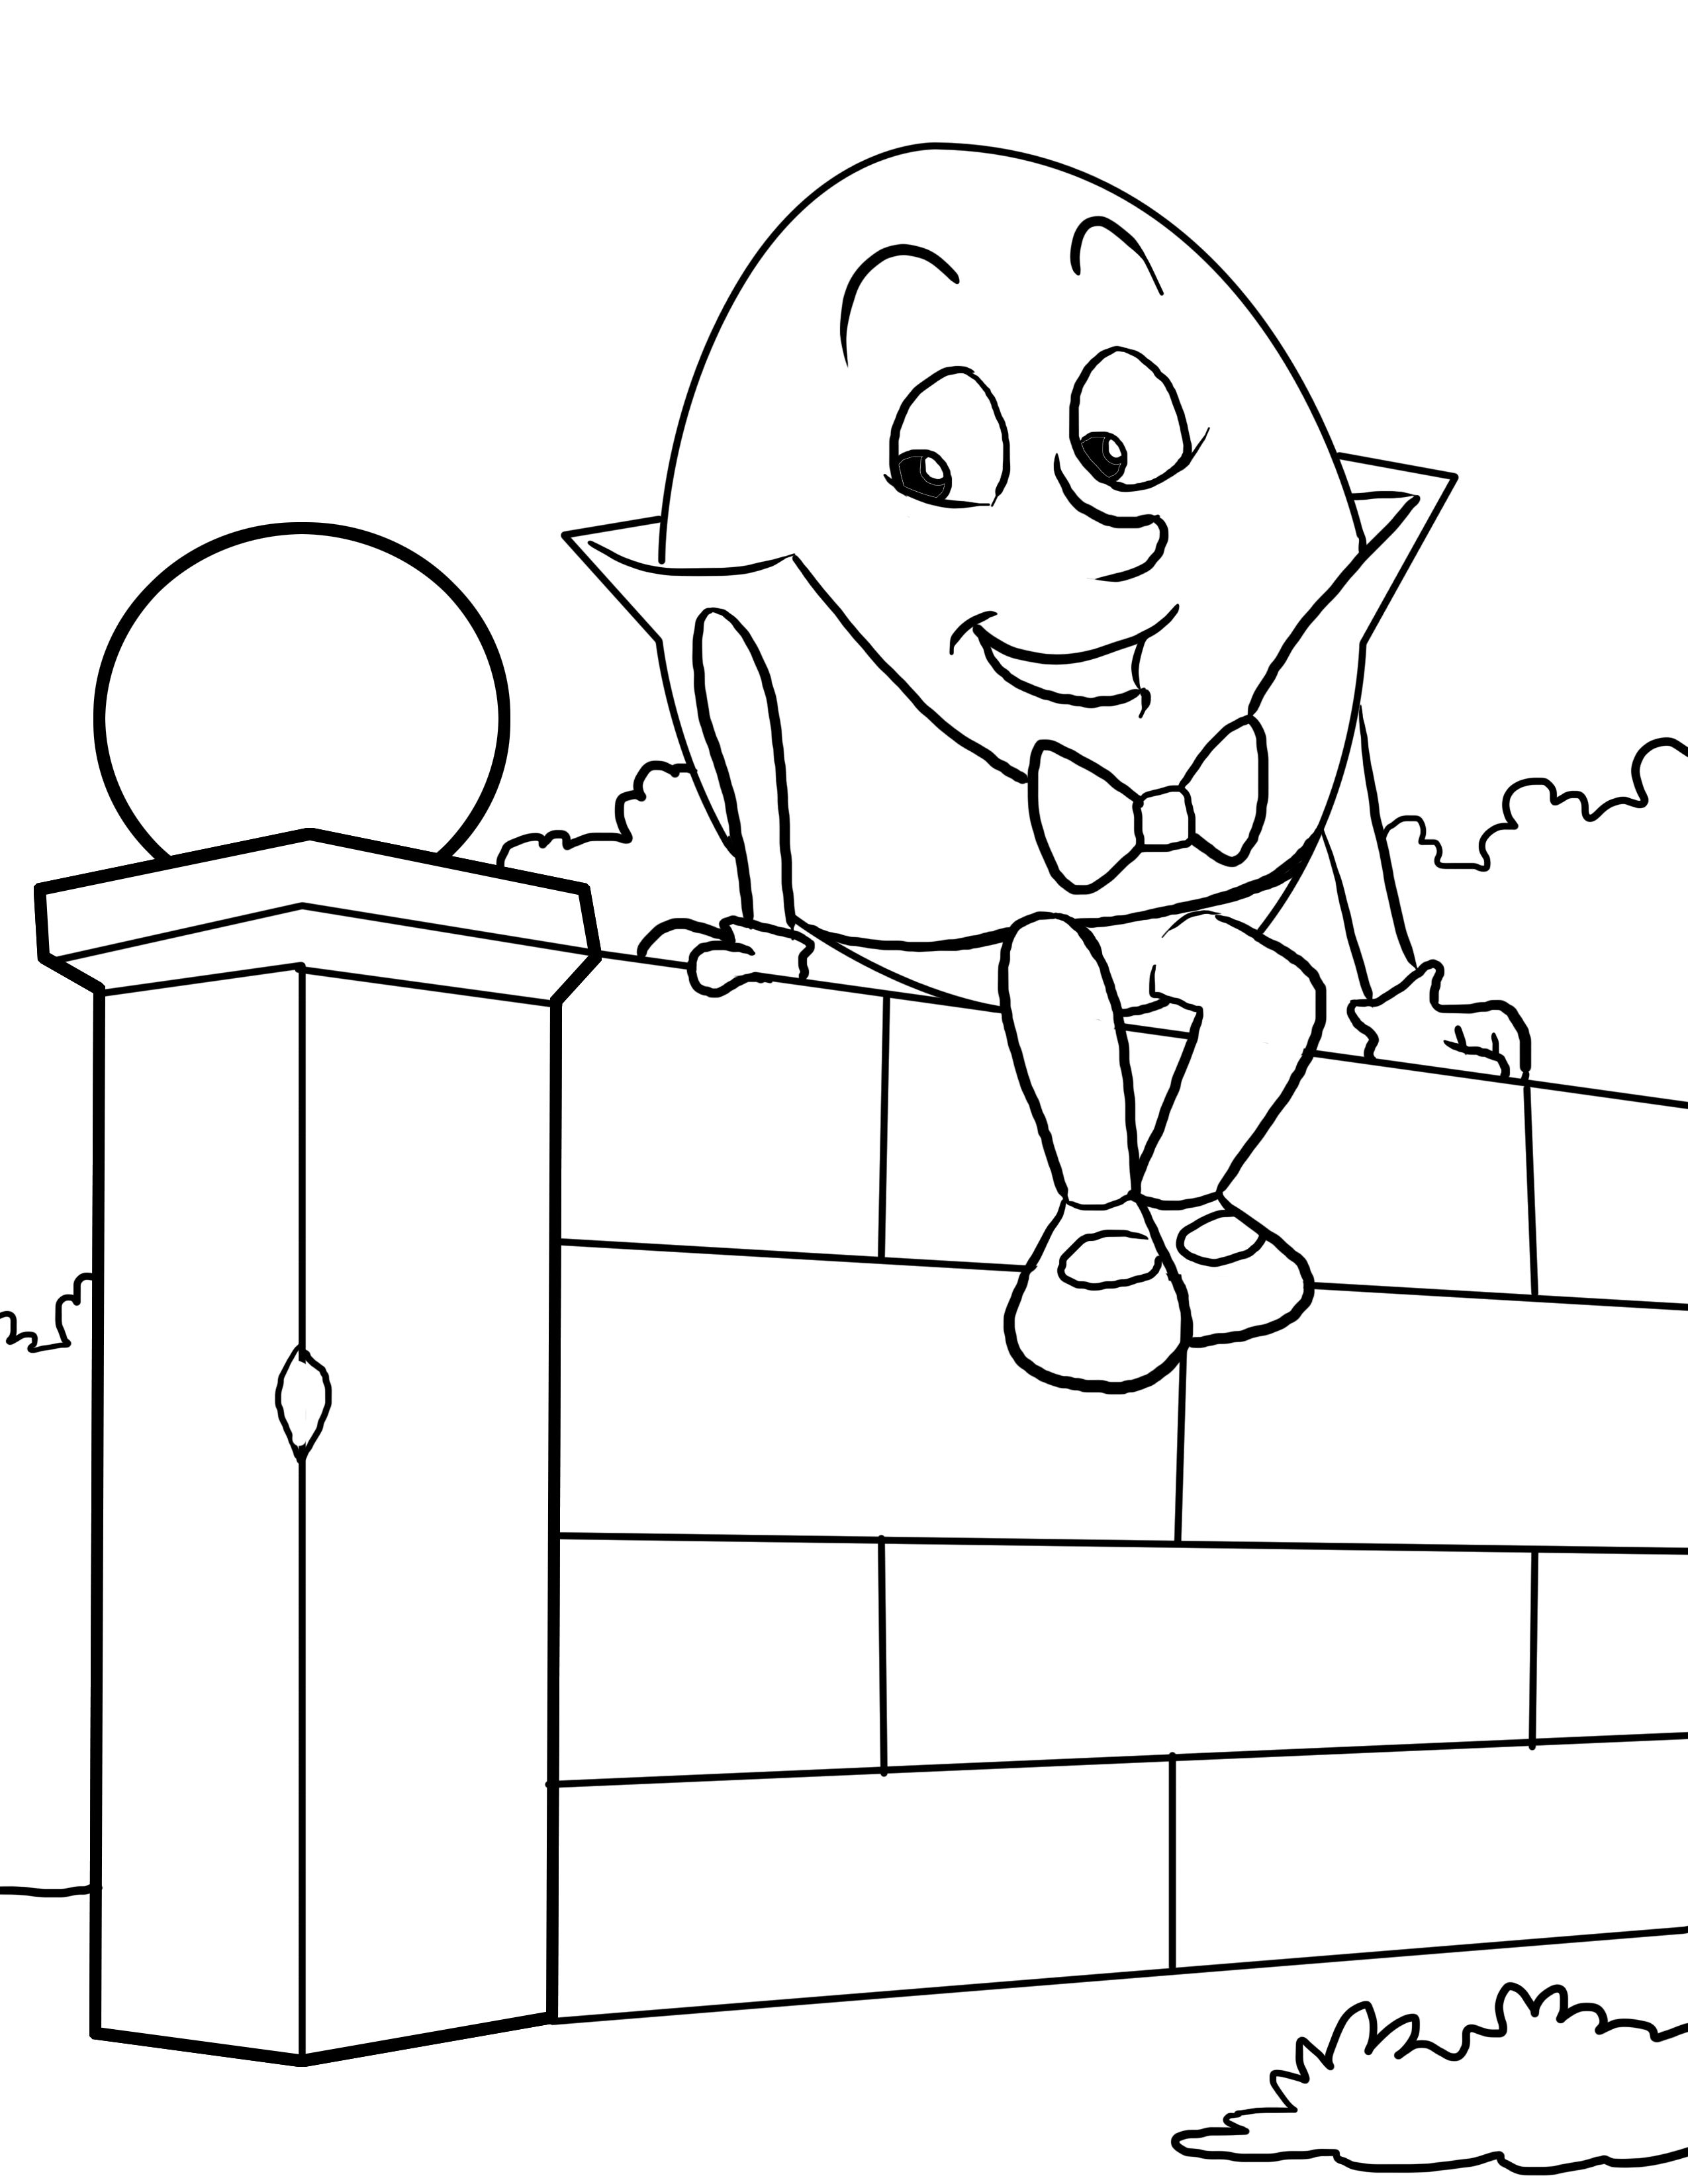 Free Printable Nursery Rhymes Coloring Pages For Kids | Home - Free Printable Nursery Rhyme Coloring Pages